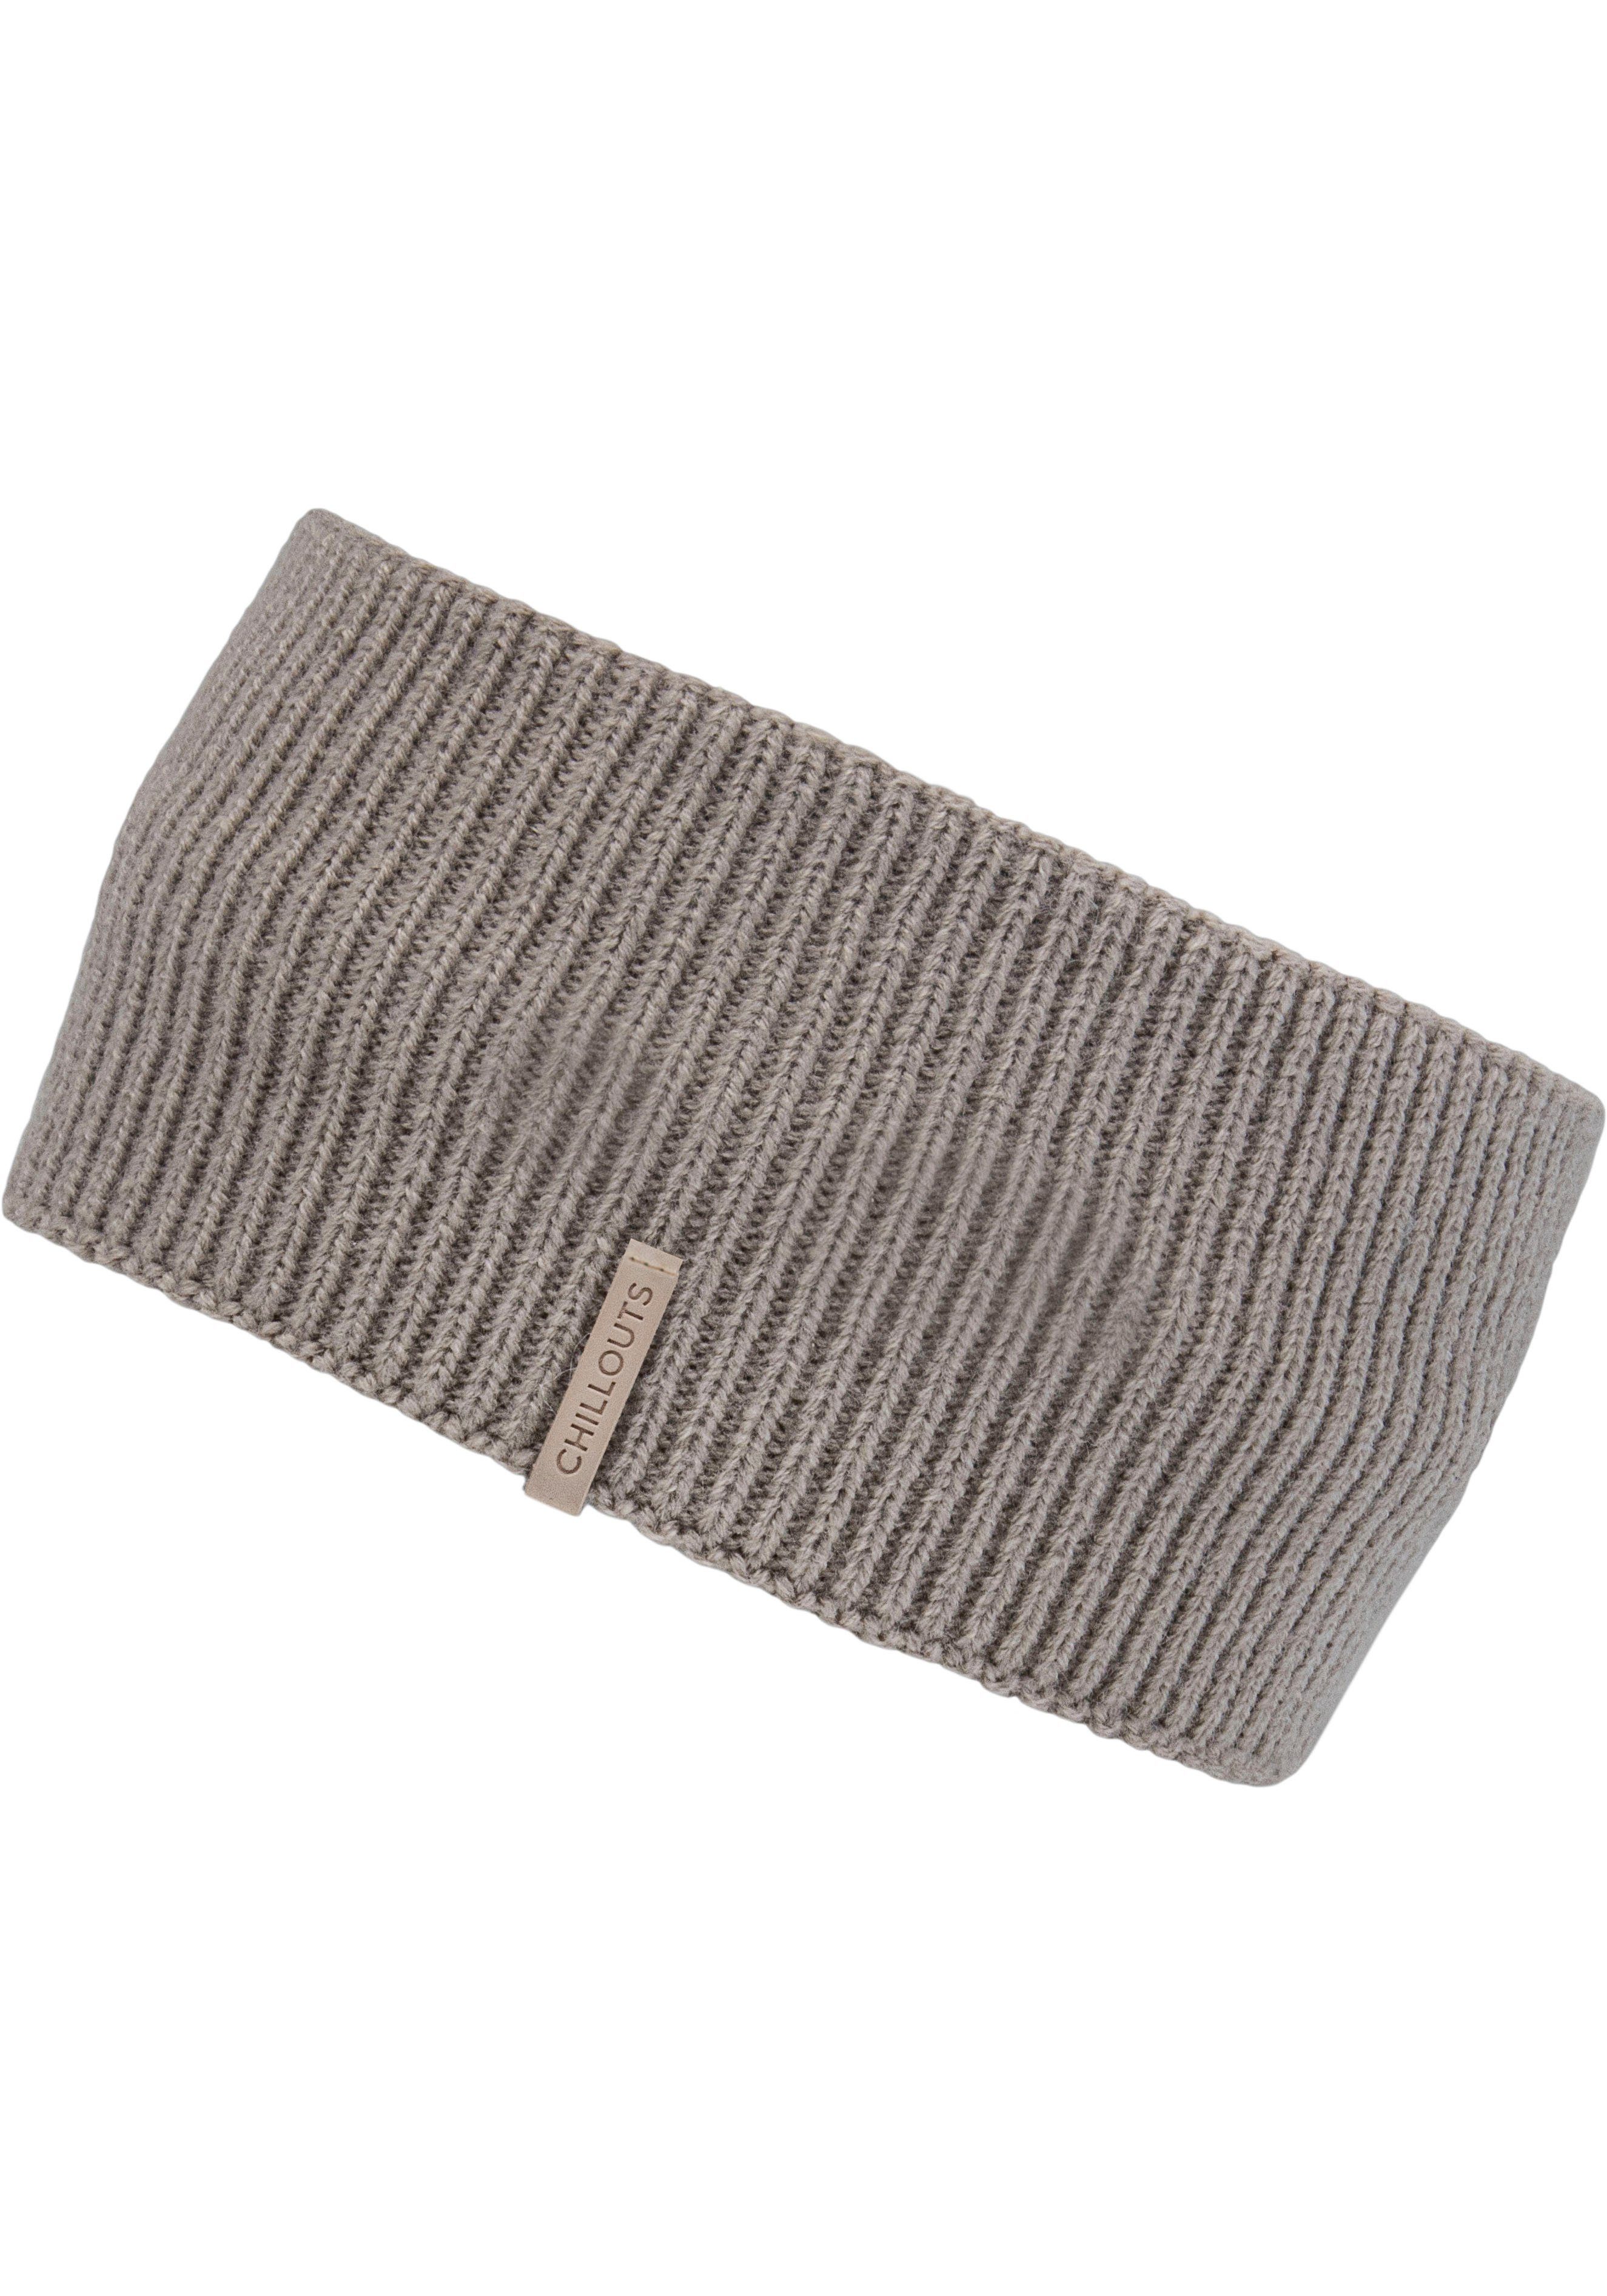 chillouts Stirnband Accessoire Headband Ida taupe Trendiges